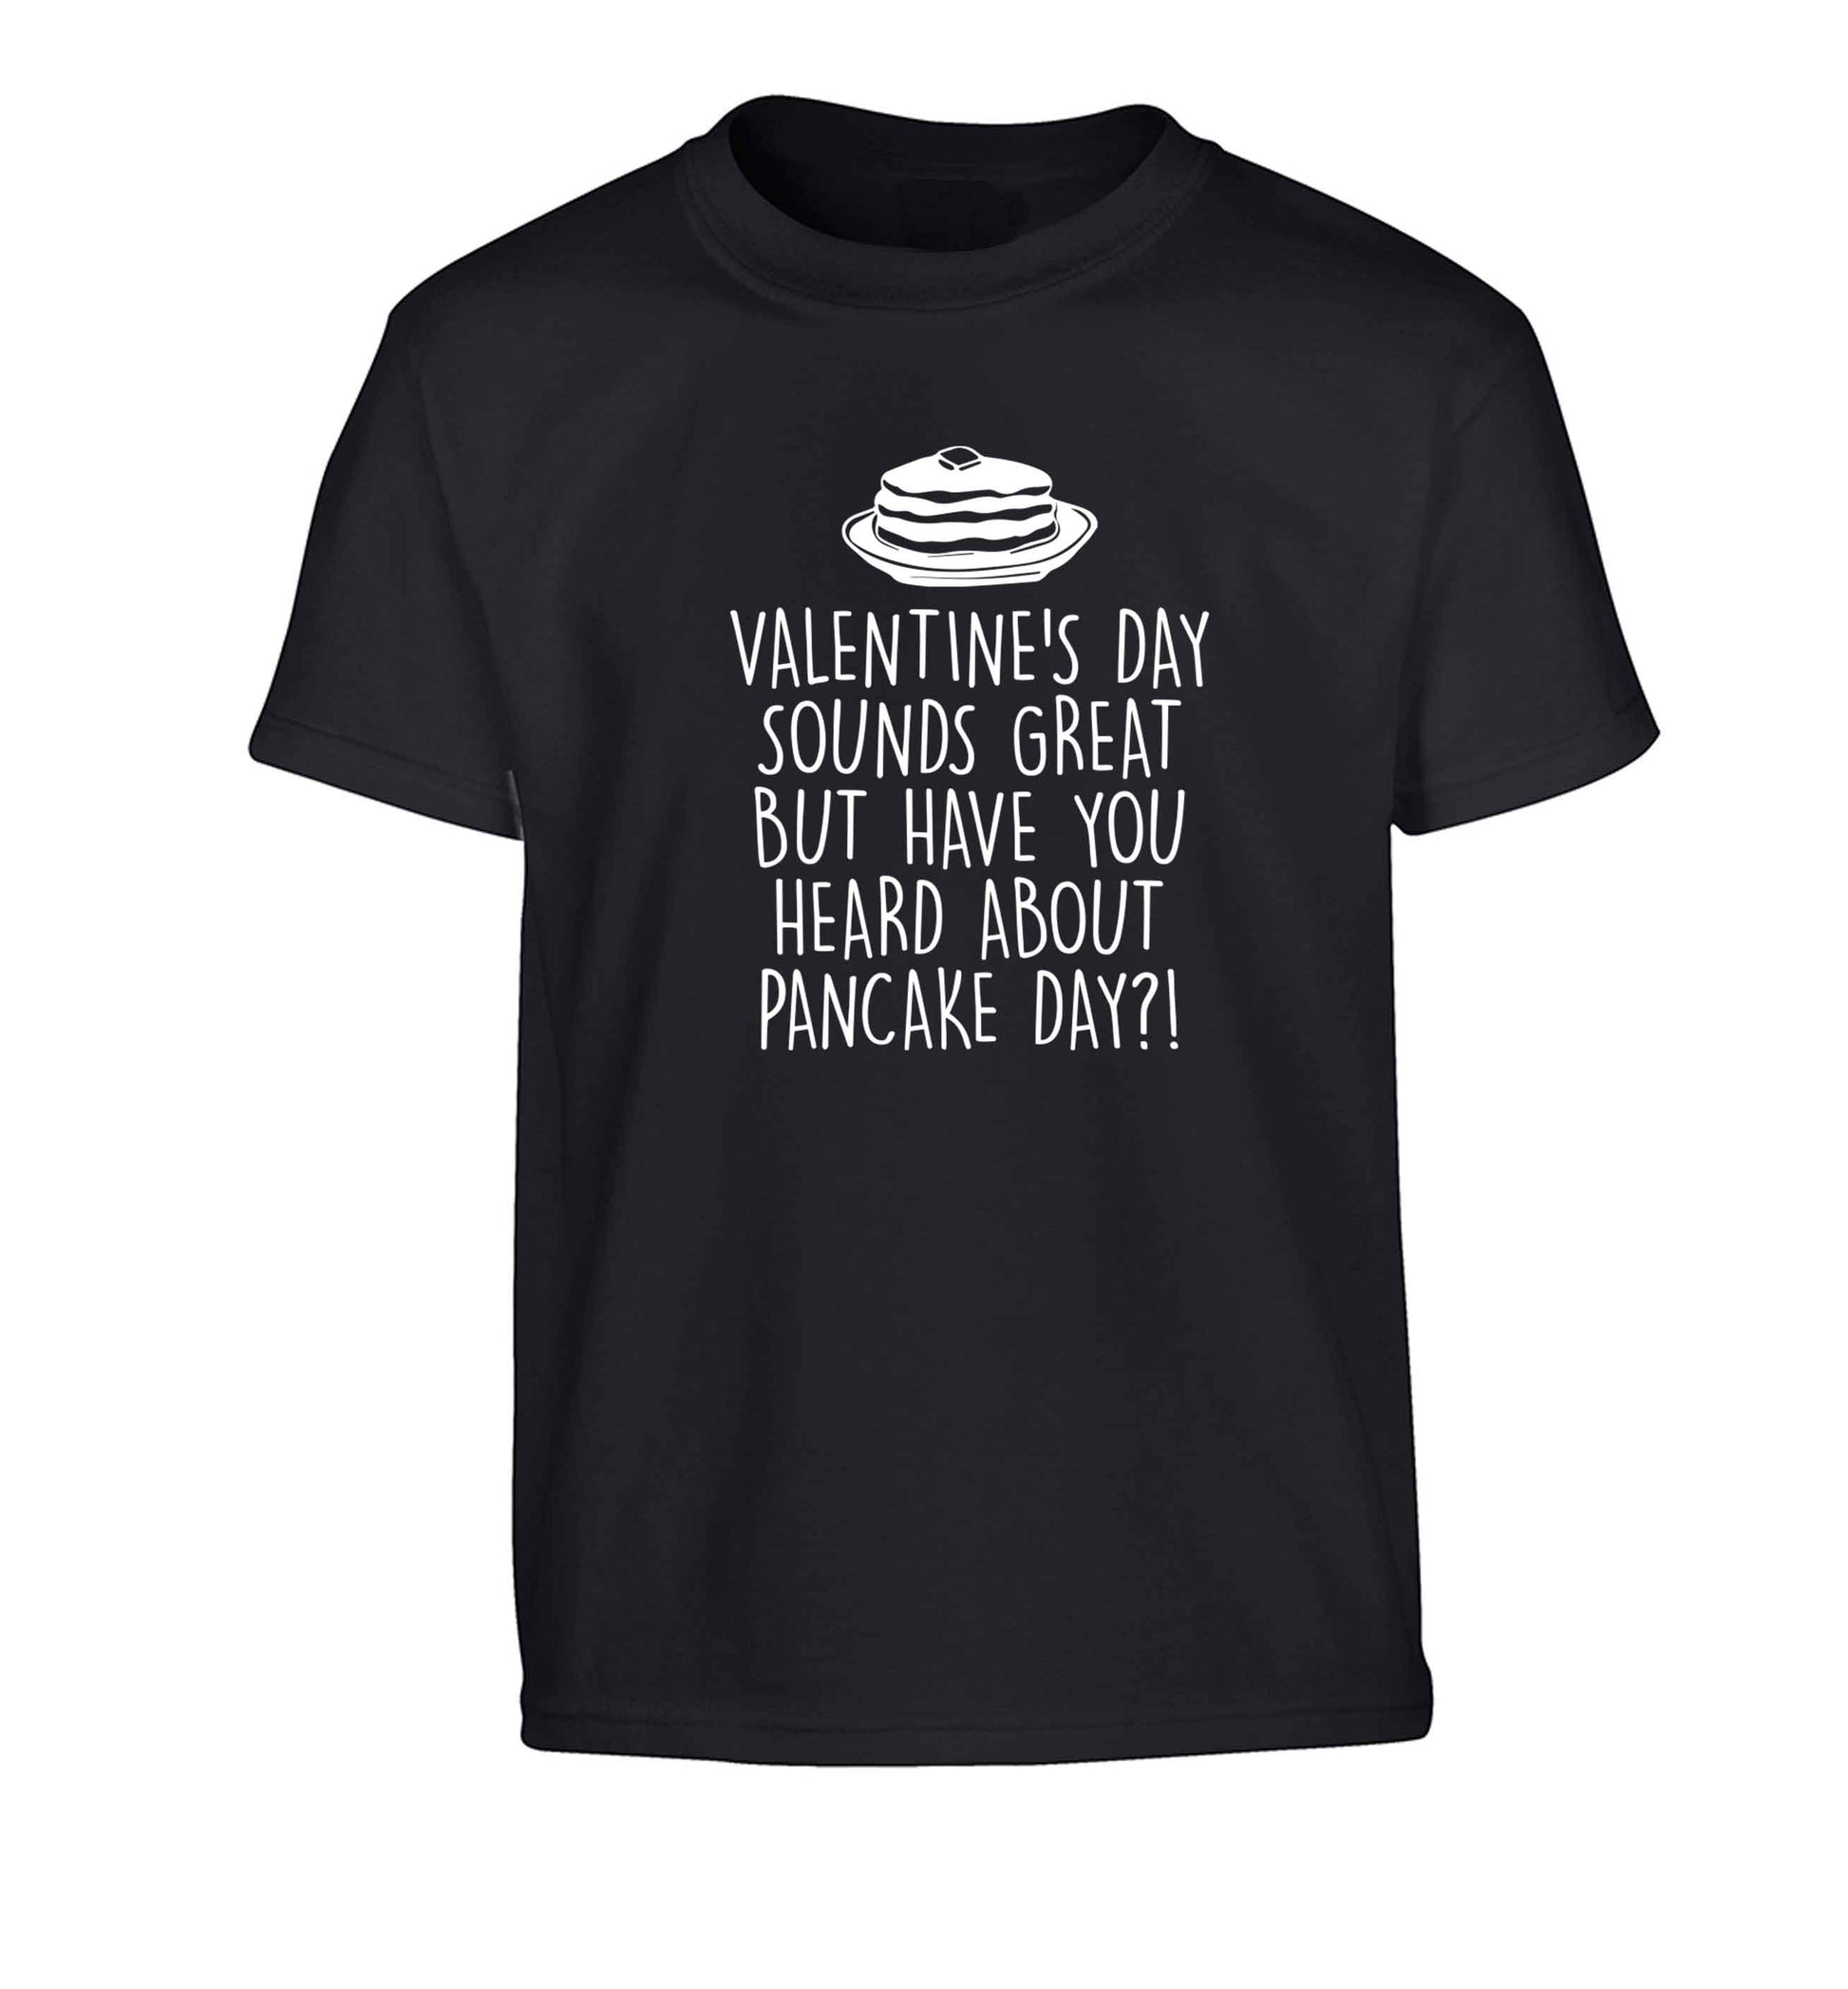 Valentine's day sounds great but have you heard about pancake day?! Children's black Tshirt 12-13 Years